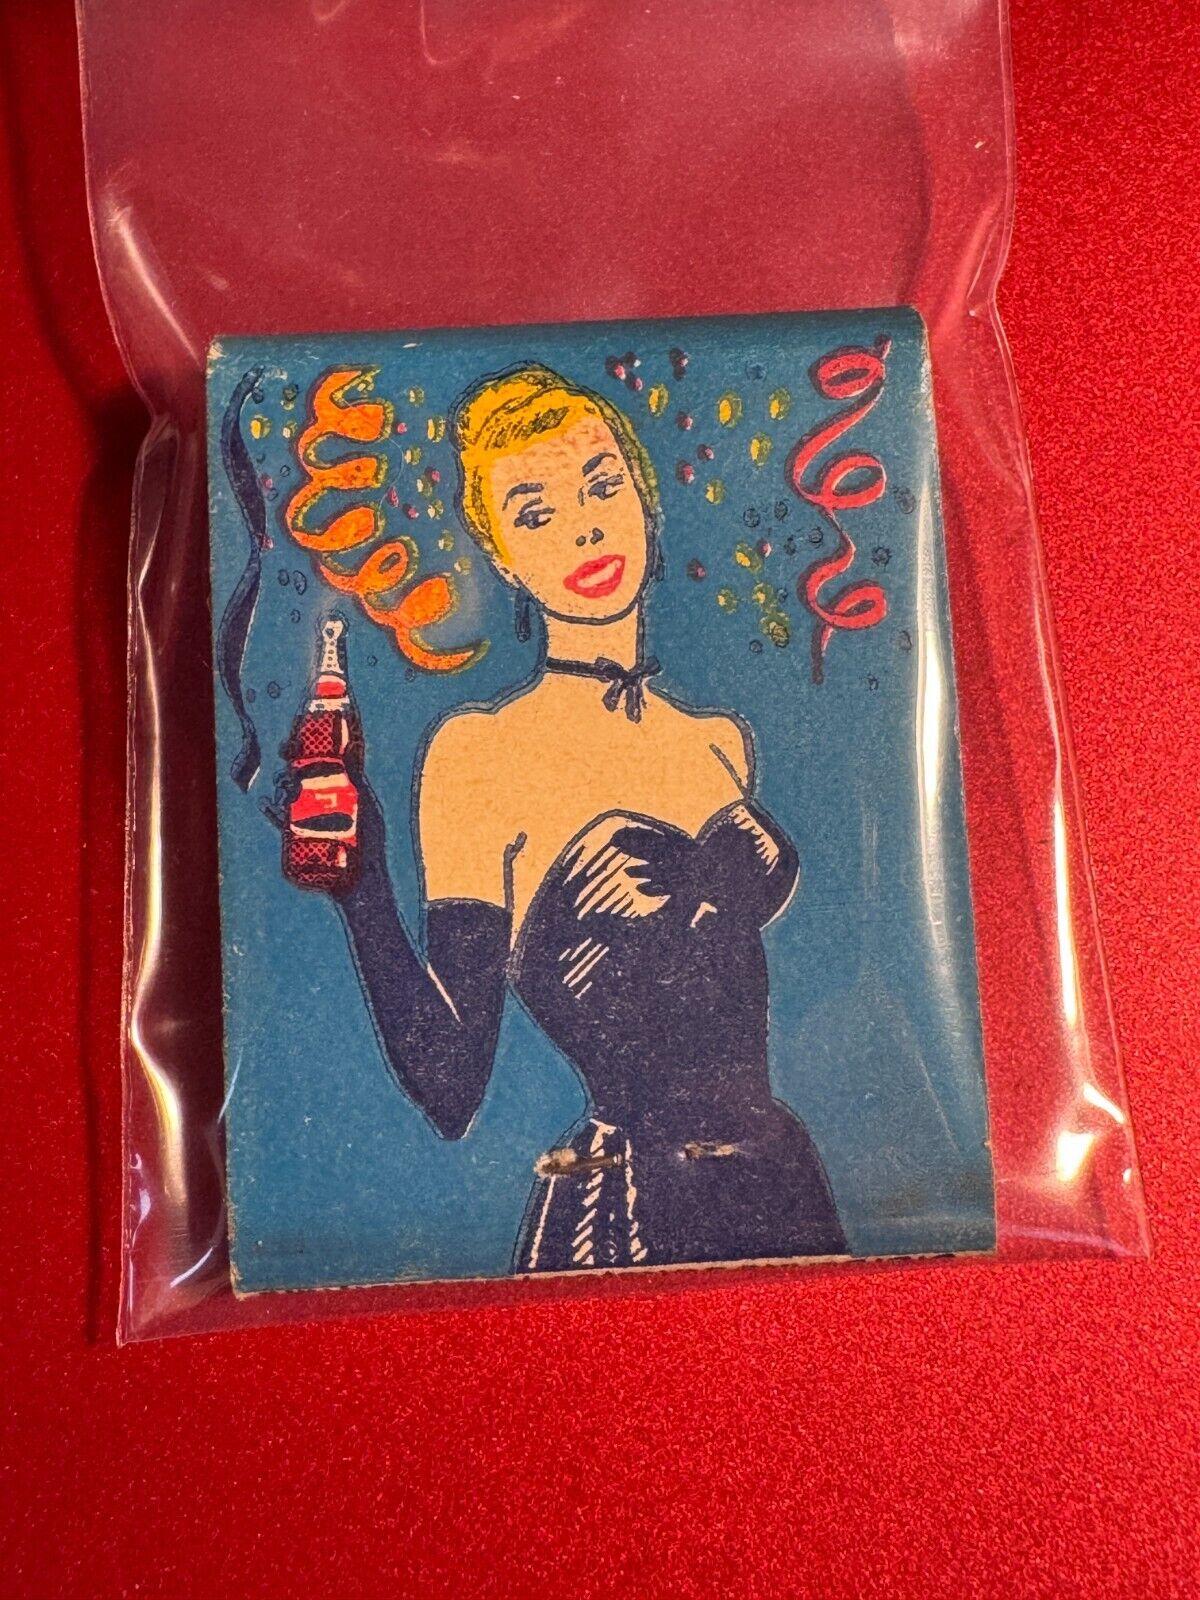 MATCHBOOK - PEPSI COLA - CERTIFIED QUALITY - LADY DRINKING PEPSI - UNSTRUCK